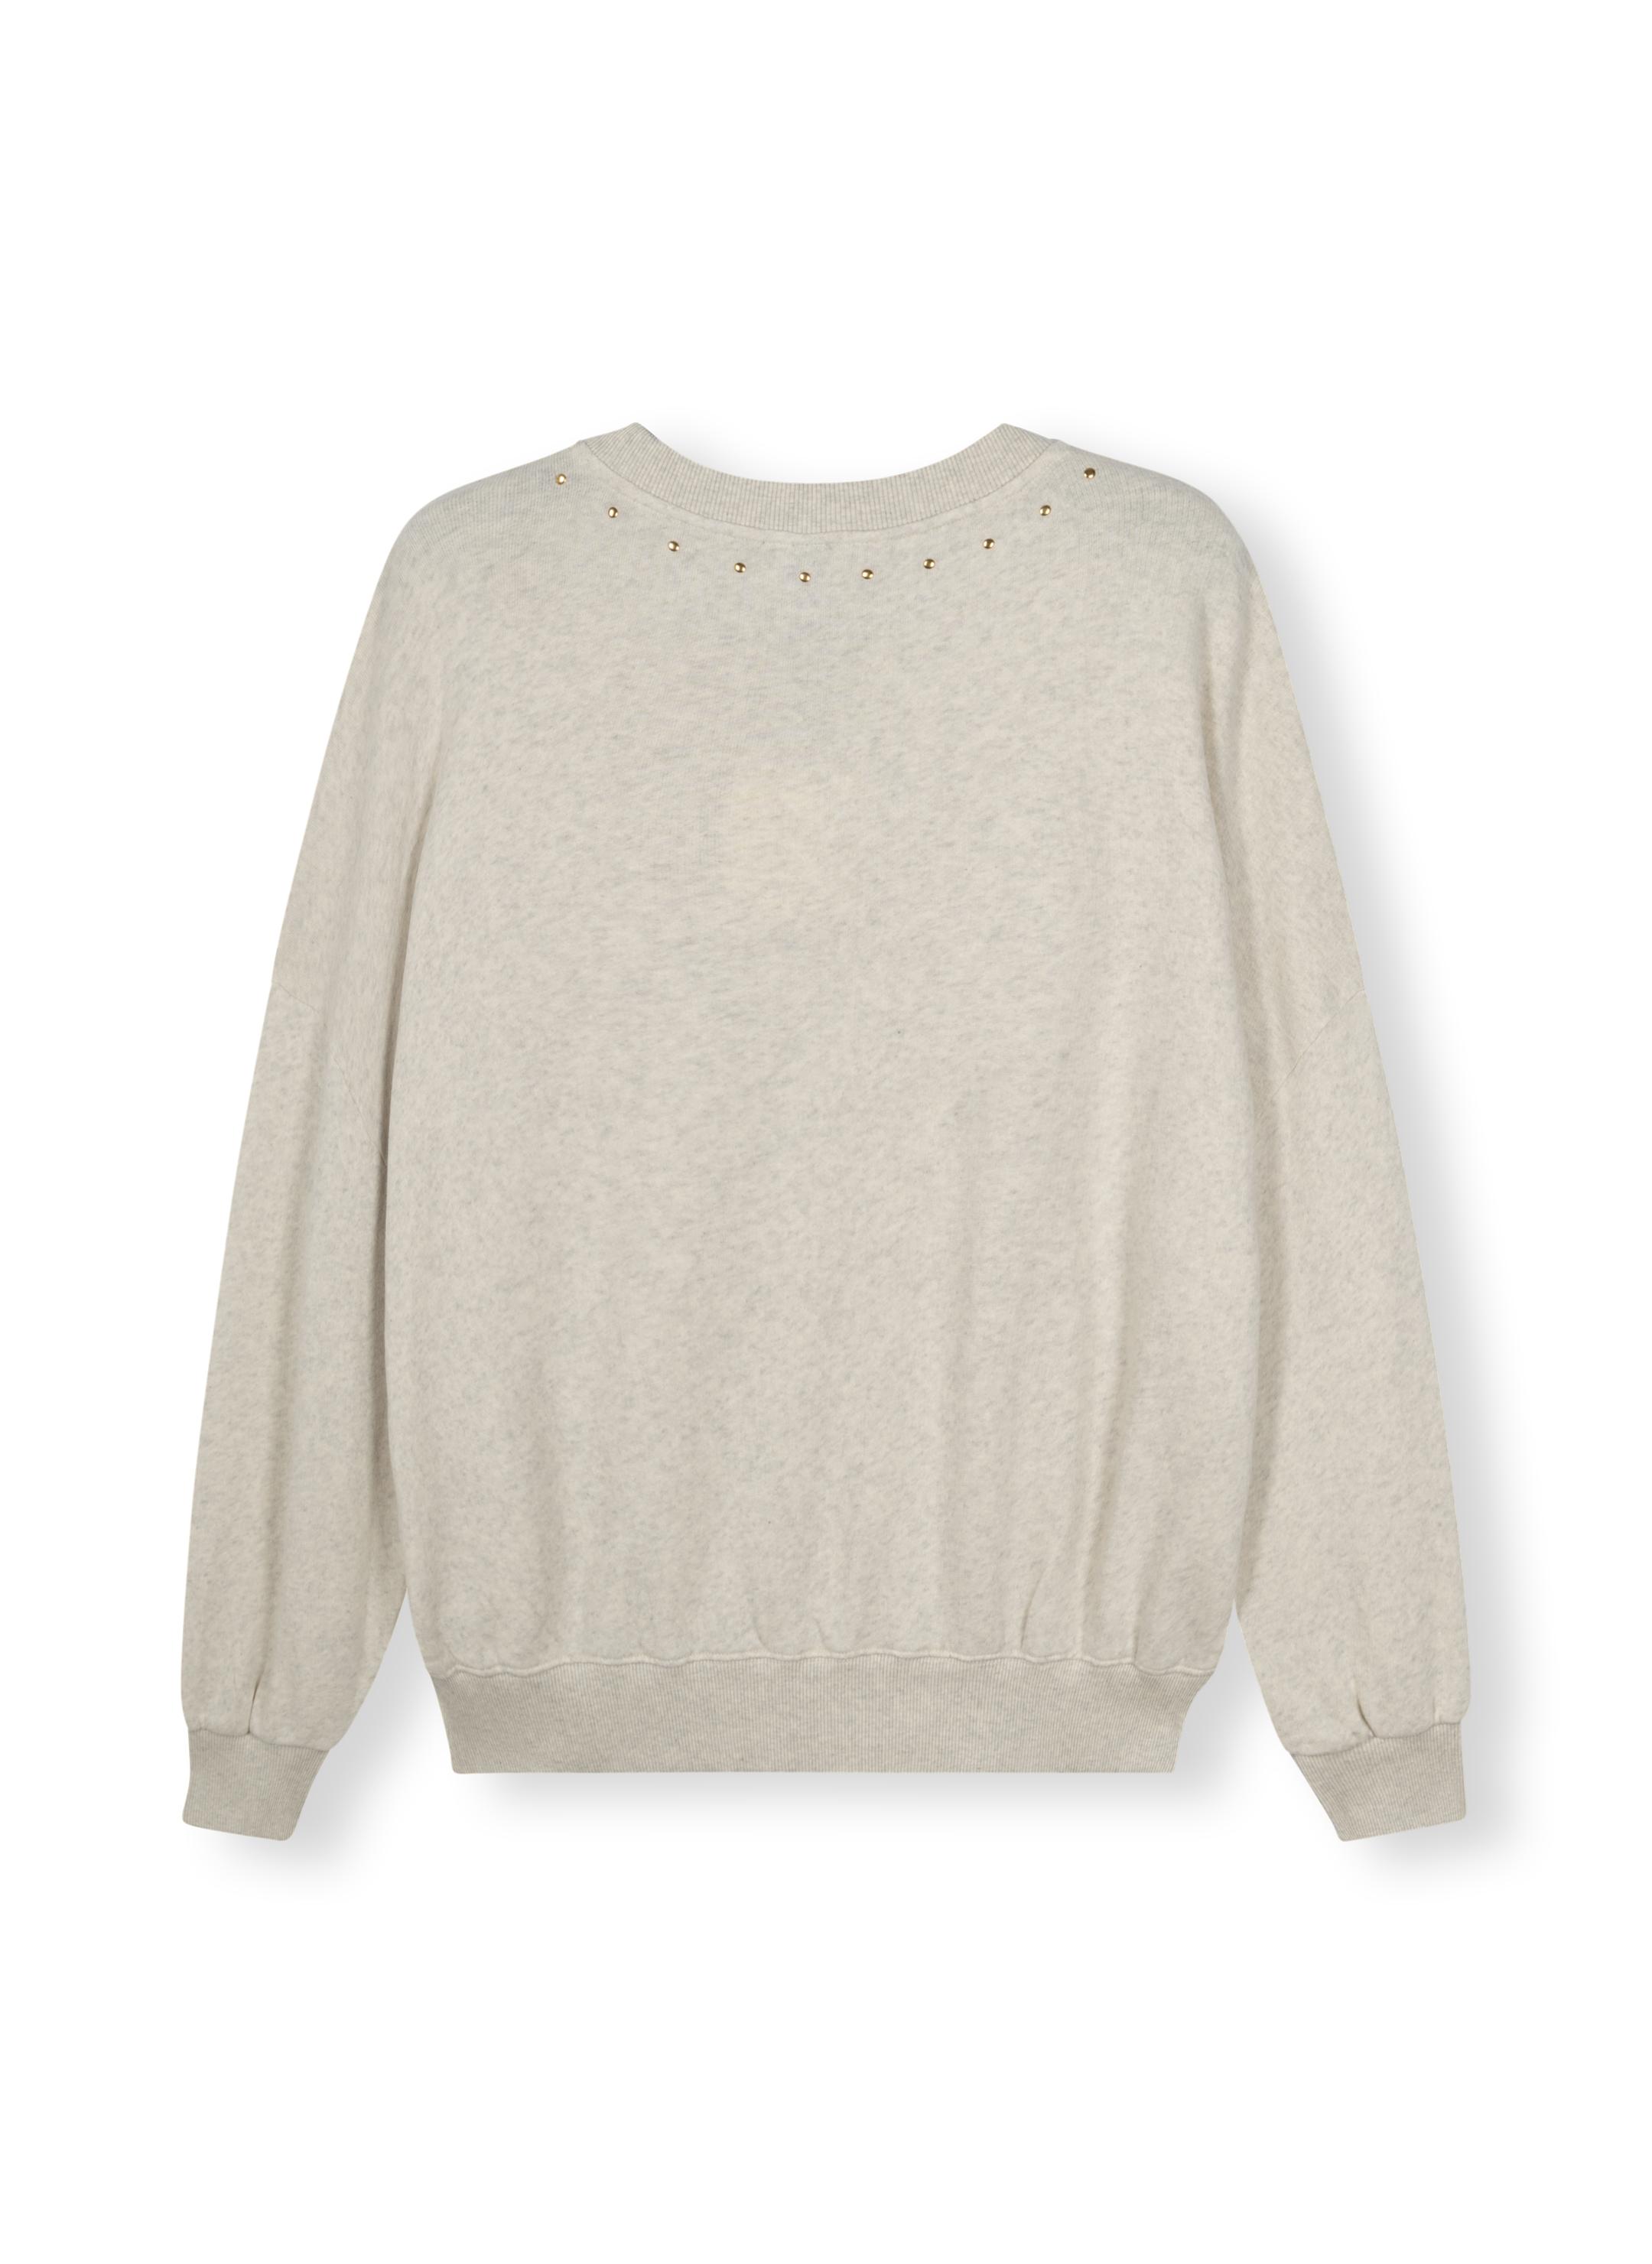 10Days sweater studs soft white melee